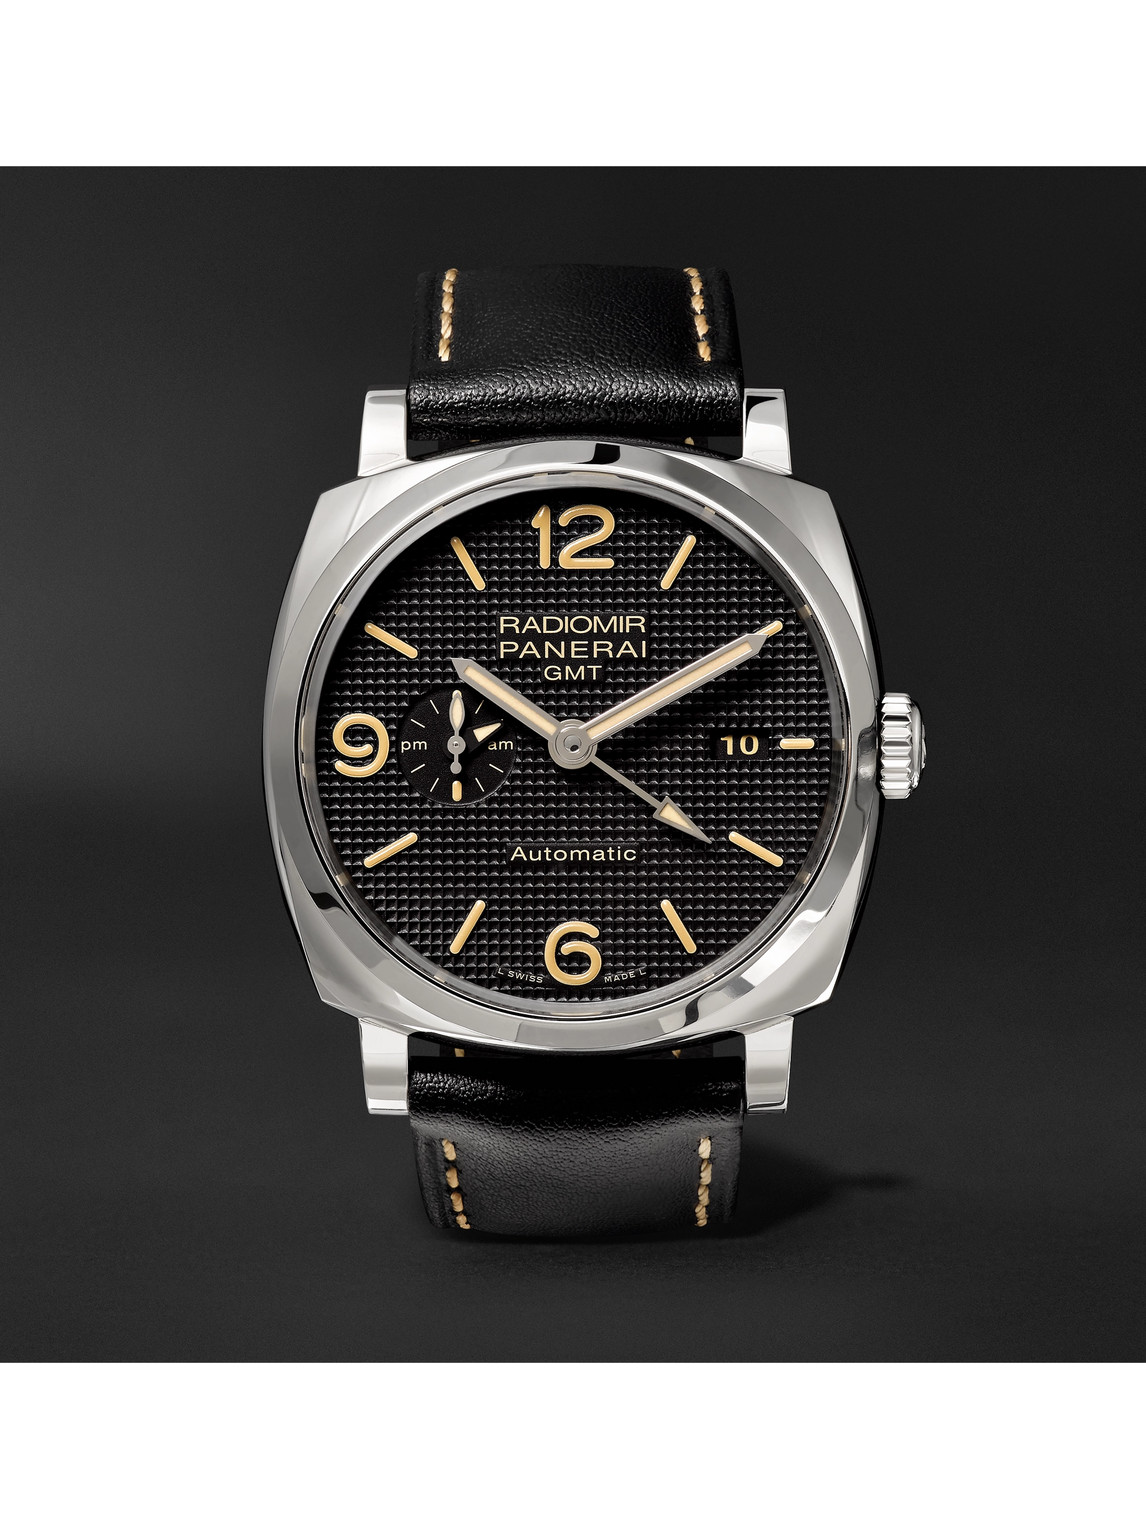 Radiomir 1940 3 Days GMT Automatic Acciaio 45mm Stainless Steel and Leather Watch, Ref. No. PAM00627